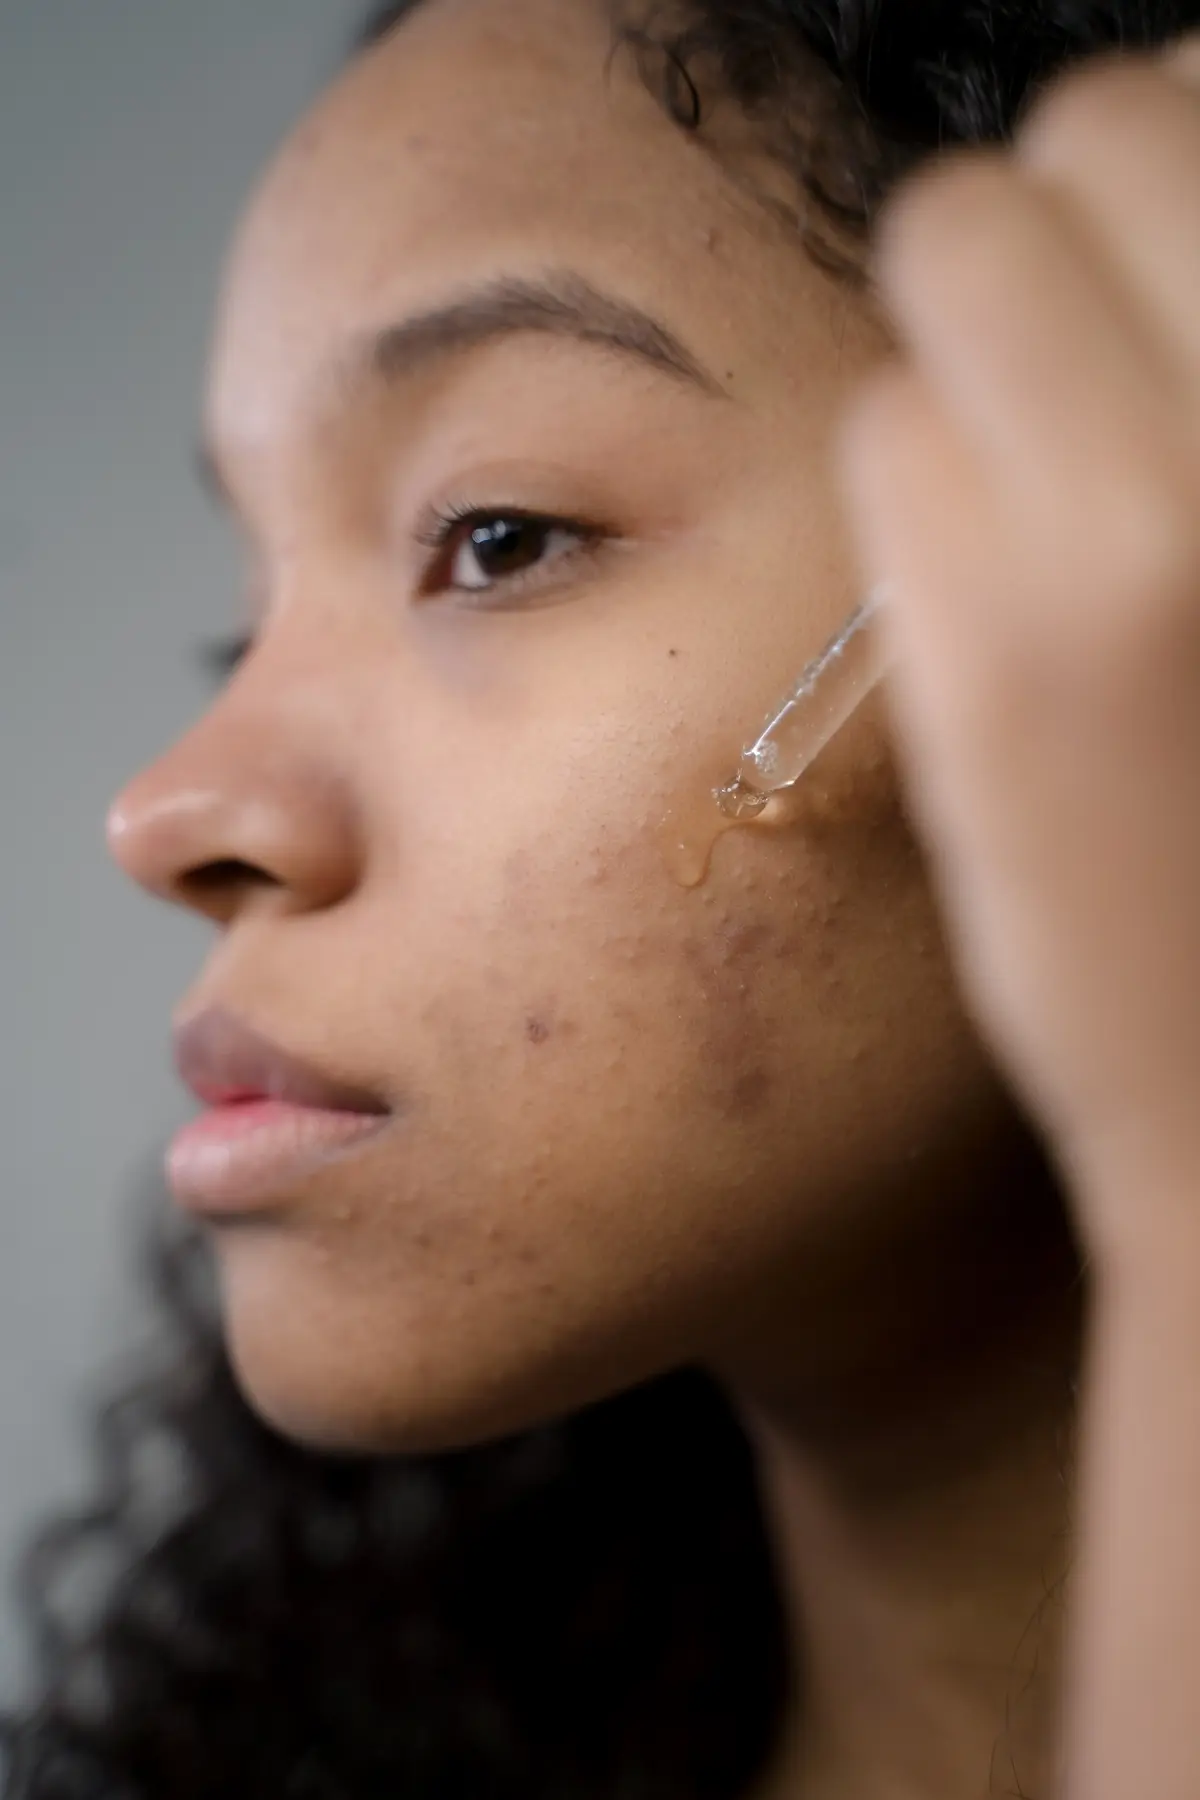 how to get rid of acne scars on face products